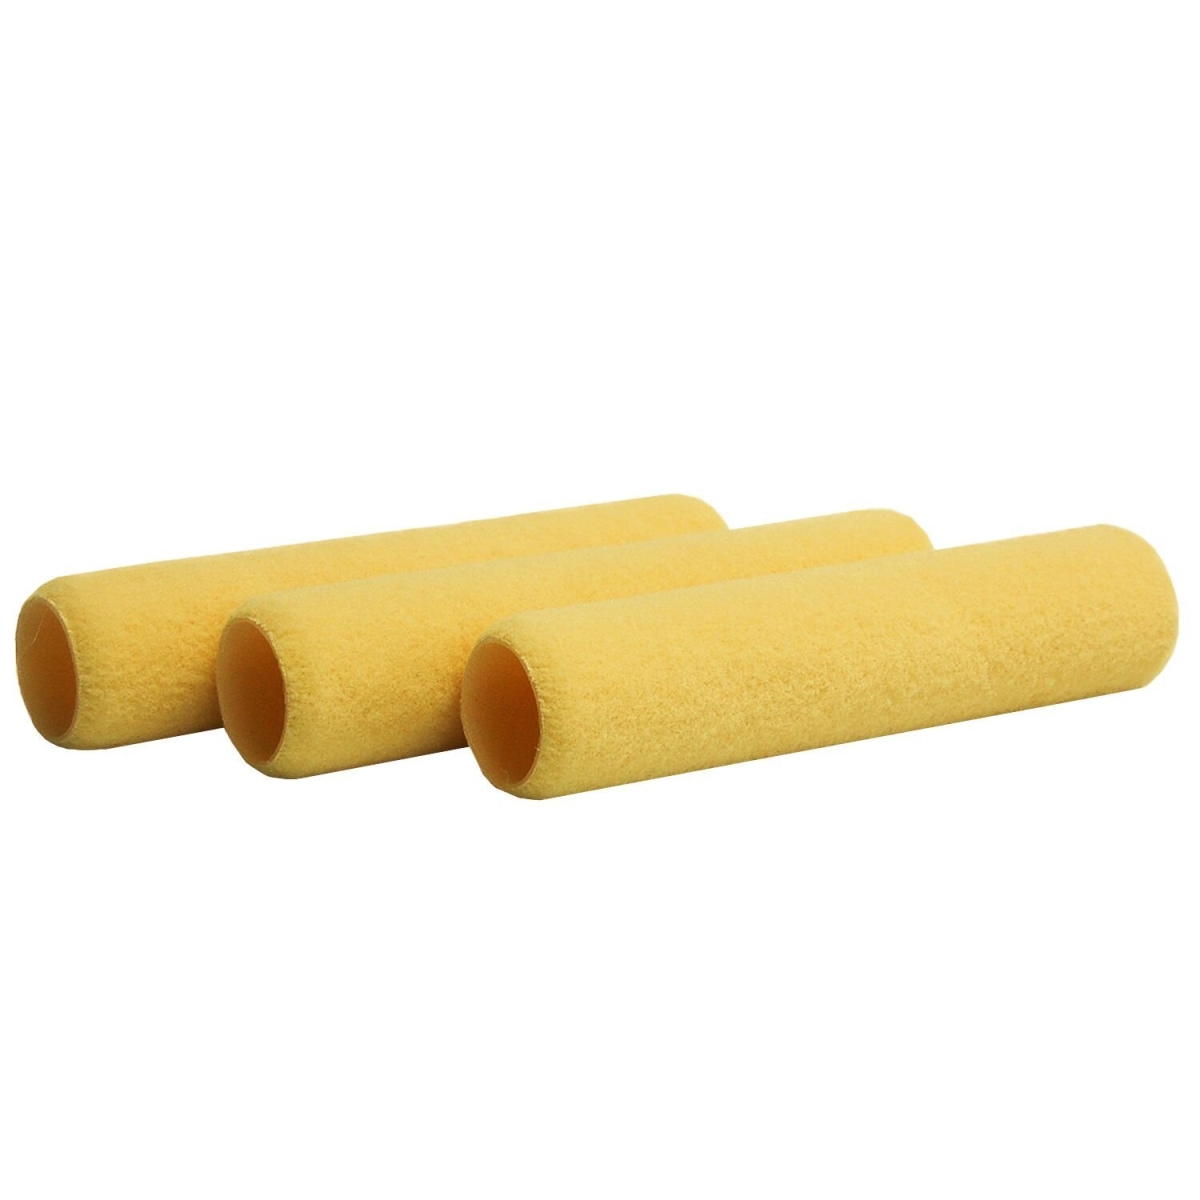 211673 9 In. One Coat Smooth Roller 0.37 In. Nap Covers In Display Box Pack Of 36